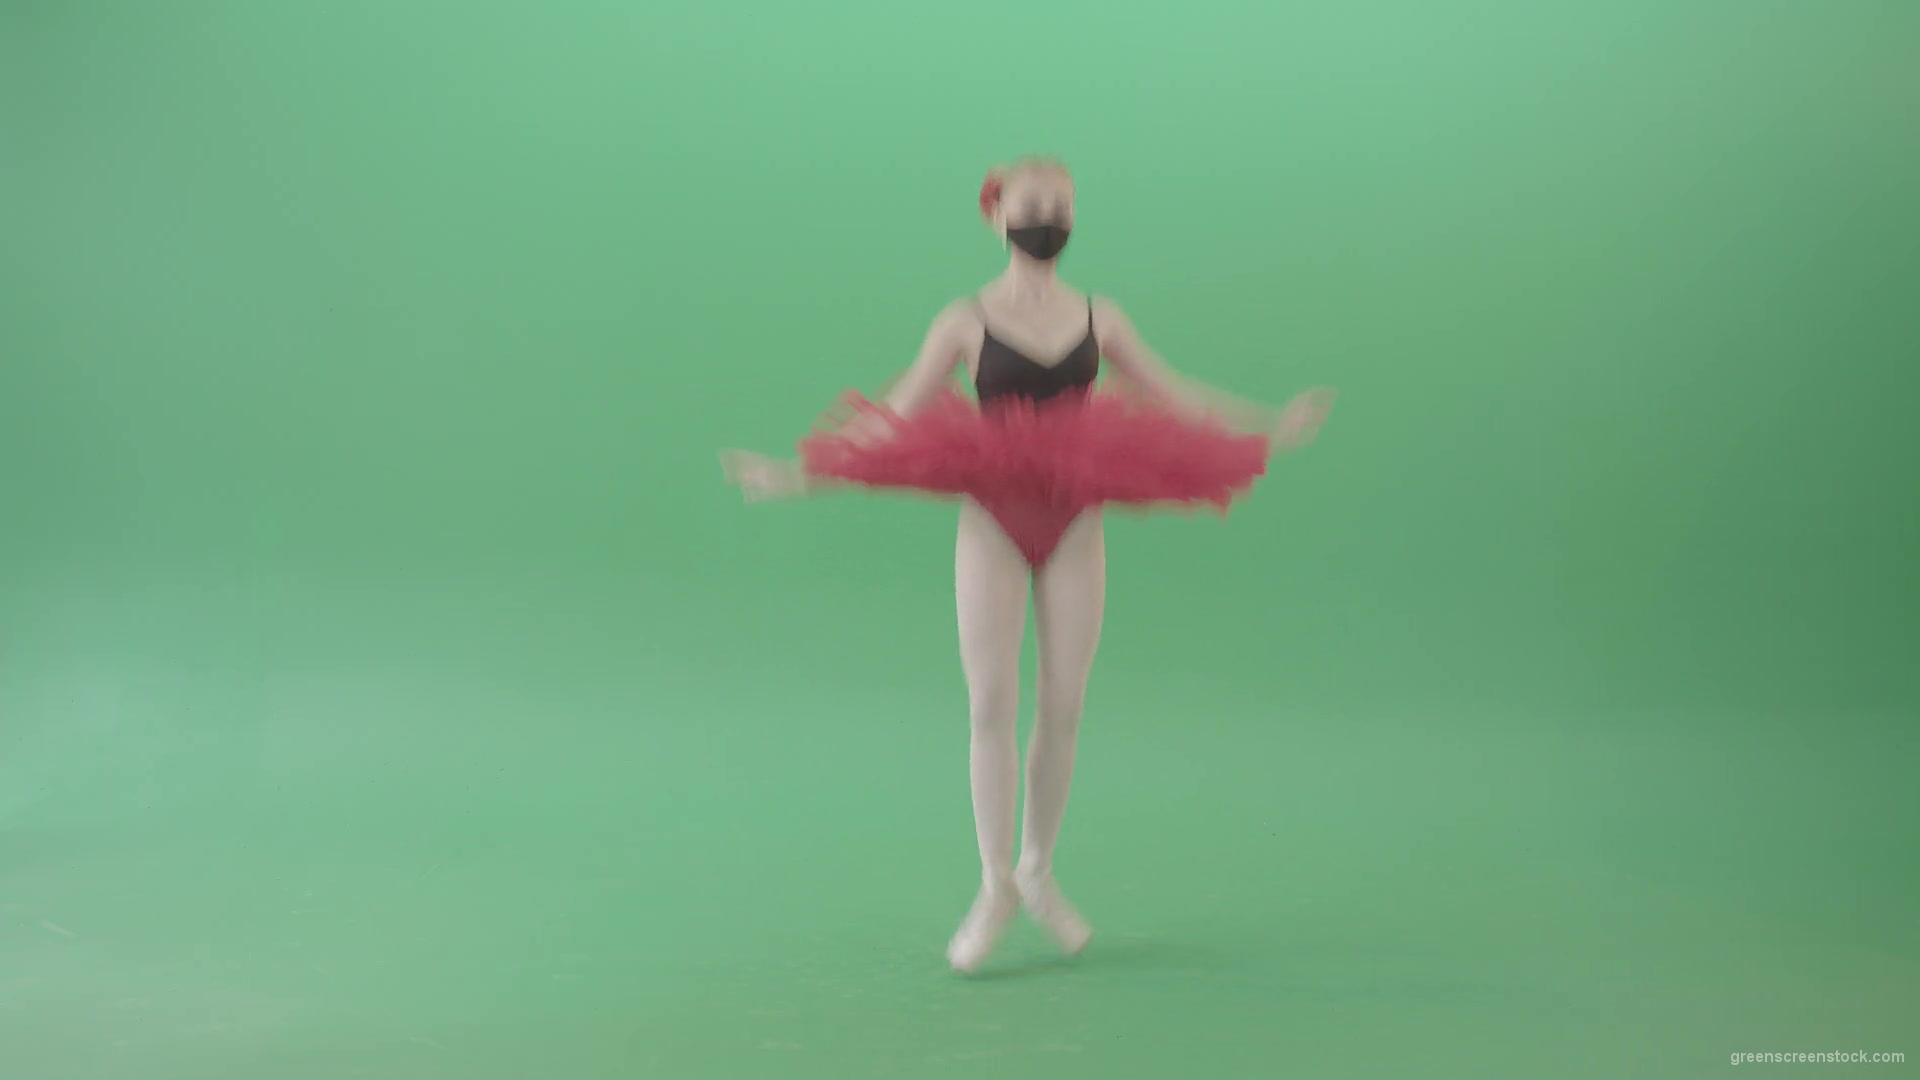 Blonde-Ballet-Girl-dancing-and-jumping-in-red-black-mask-isolated-on-green-screen-4K-Video-Footage--1920_002 Green Screen Stock